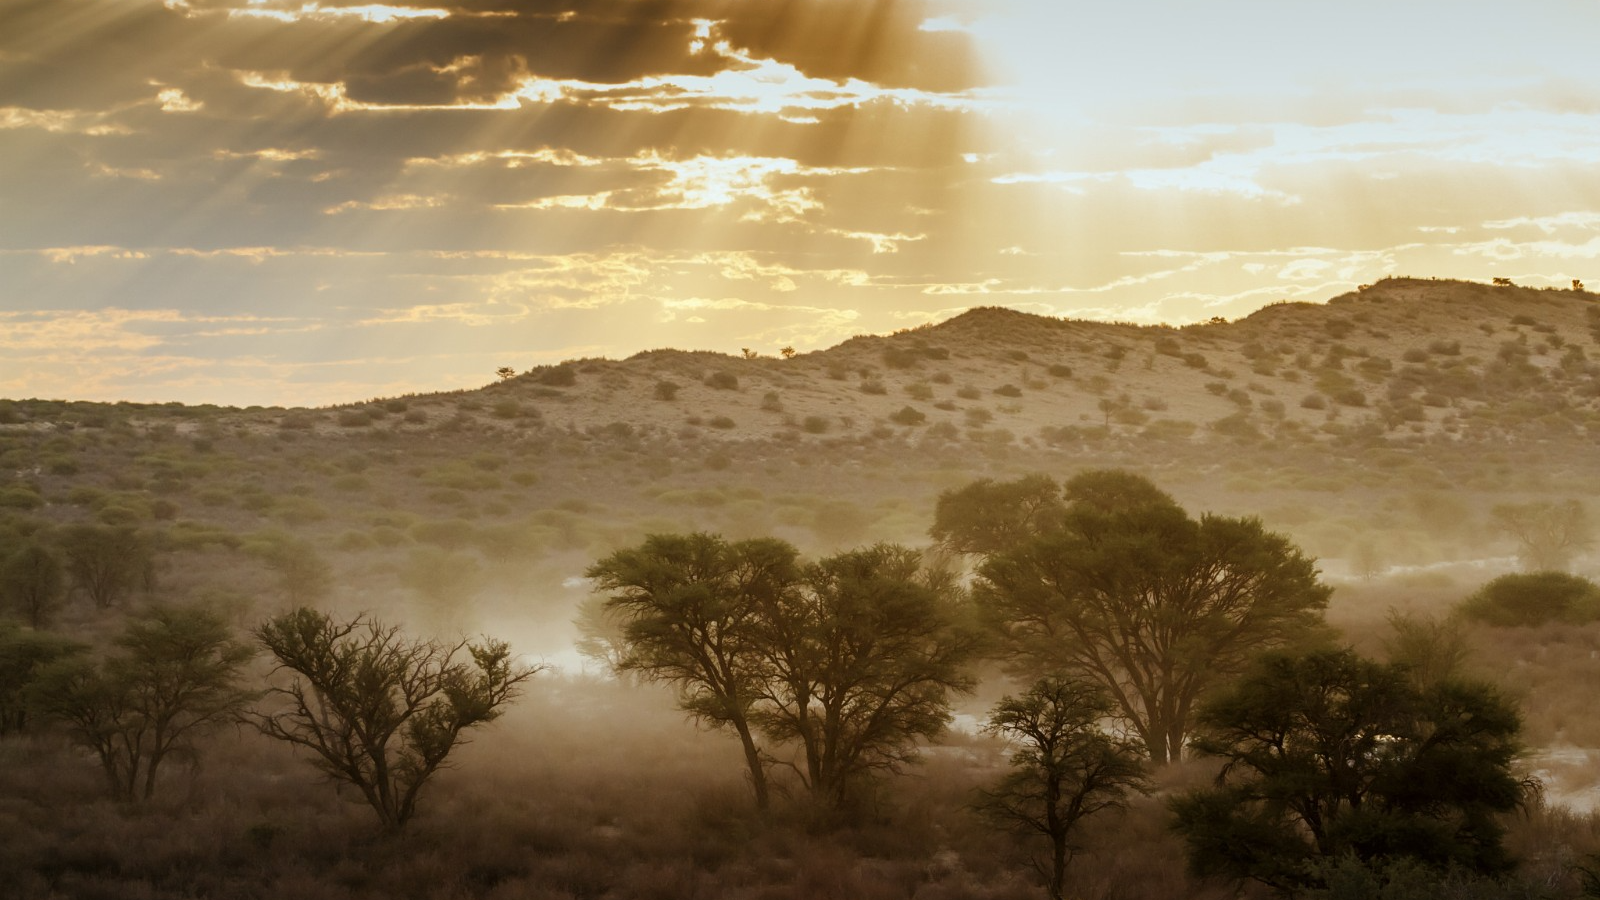 View of Kgalagadi Transfrontier Park in Northern Cape, South Africa. /CFP